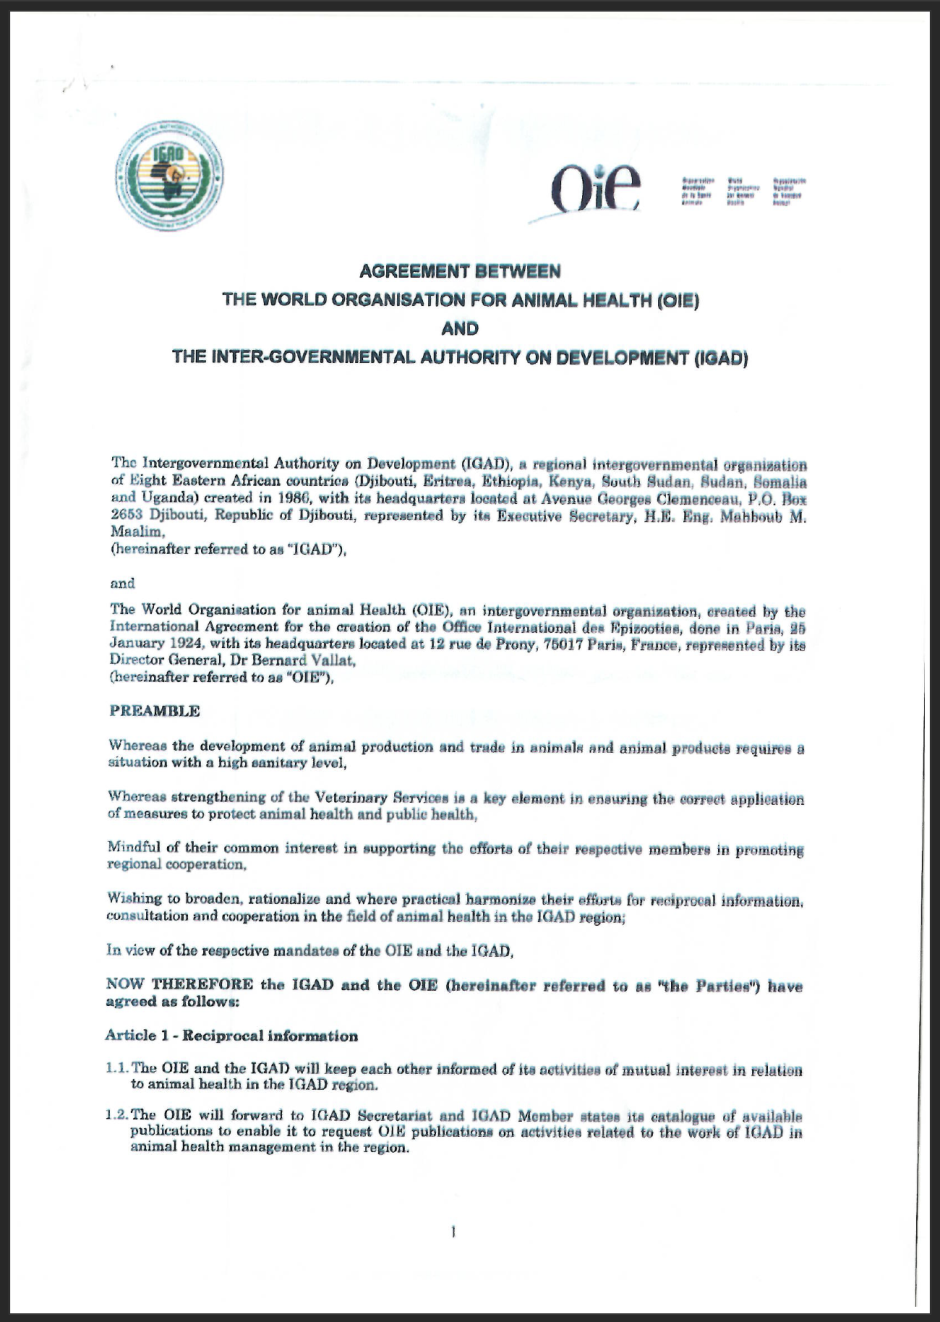 Agreement with the Inter Governmental Authority on Development (IGAD)